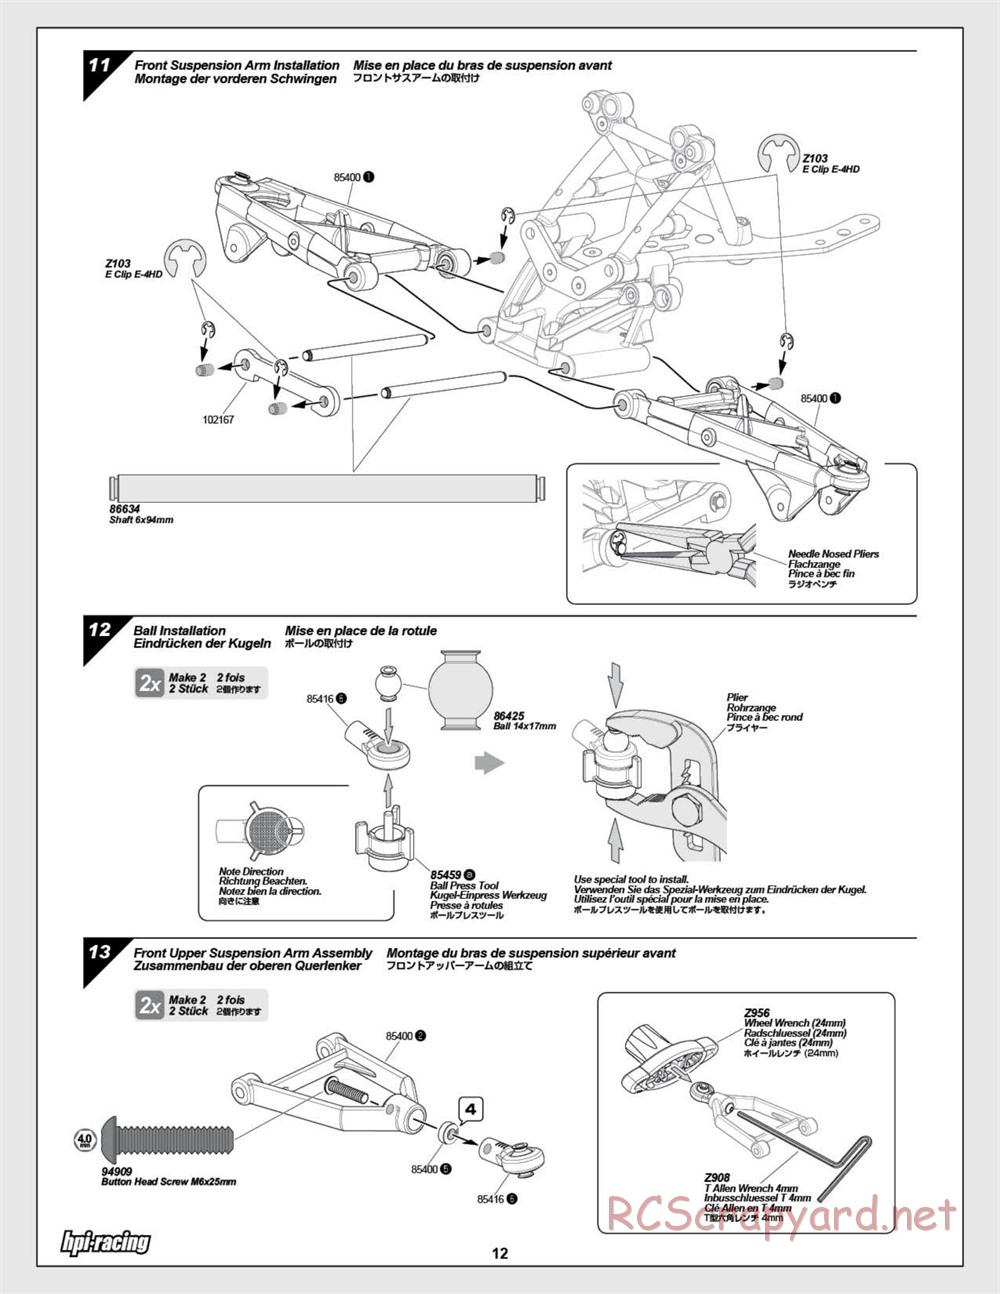 HPI - Baja 5SC SS - Exploded View - Page 12